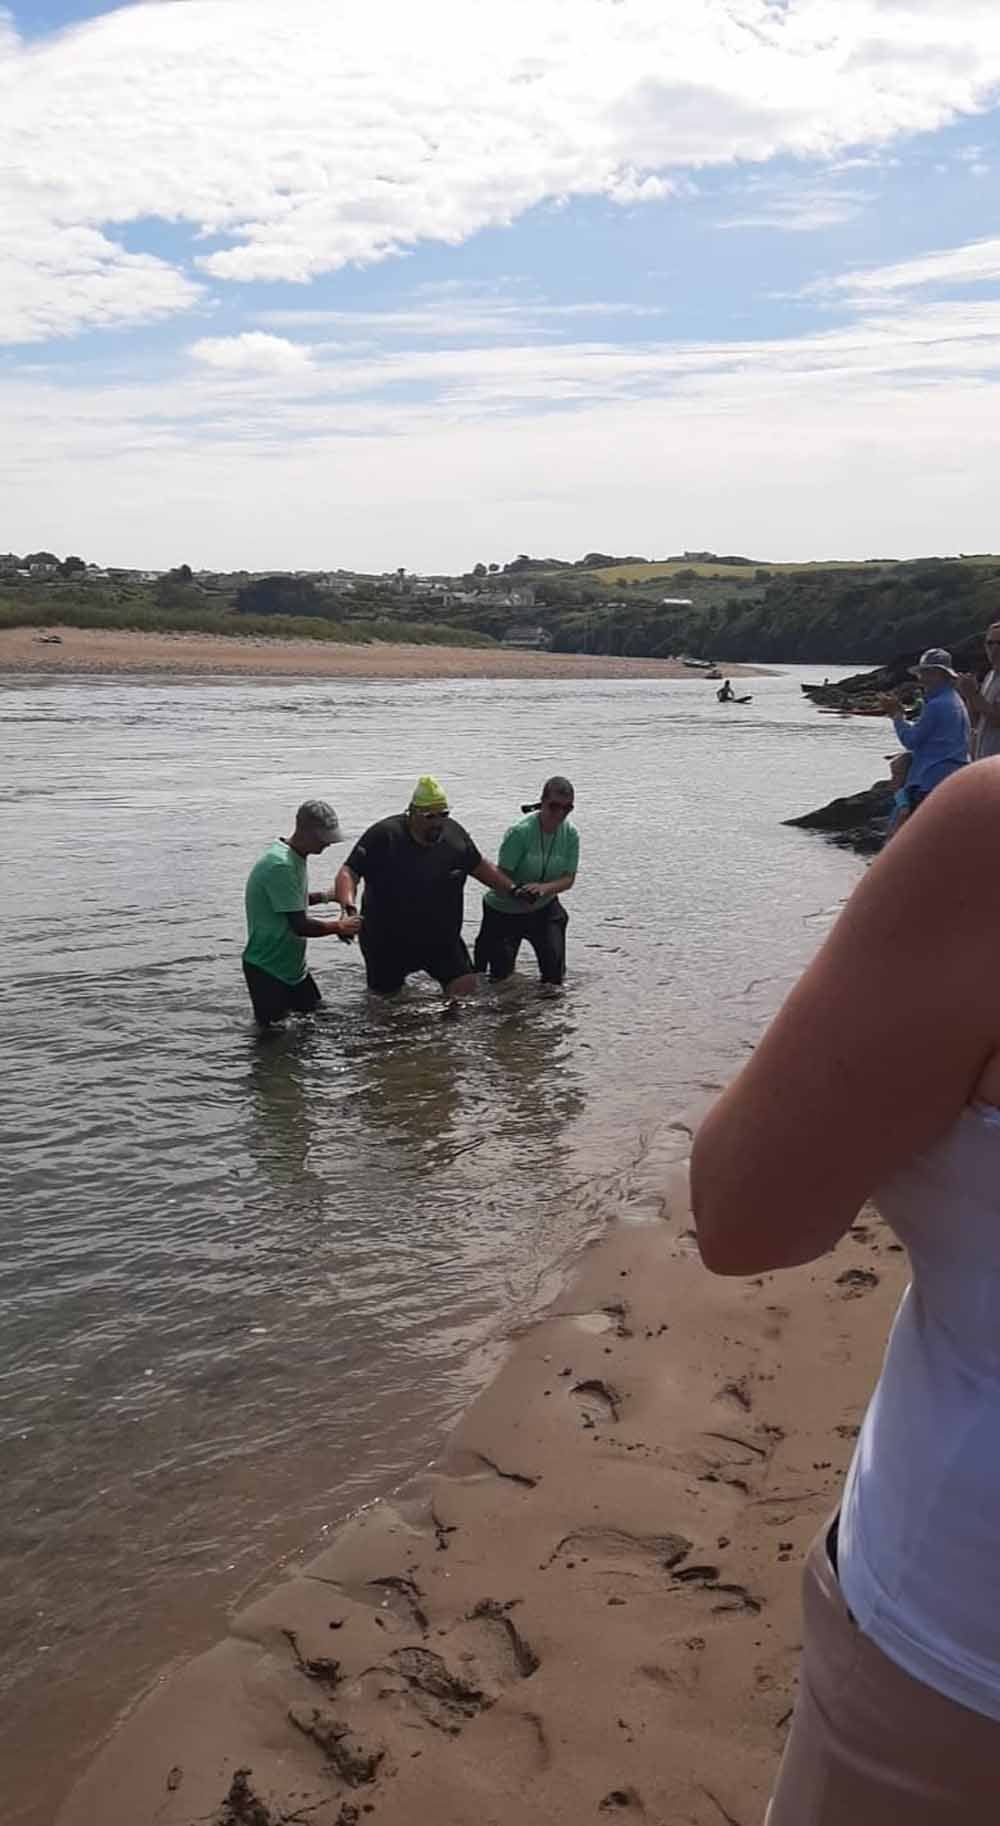 Stuart pictured here being helped out of the water after the swim event. (Collect/PA Real Life)